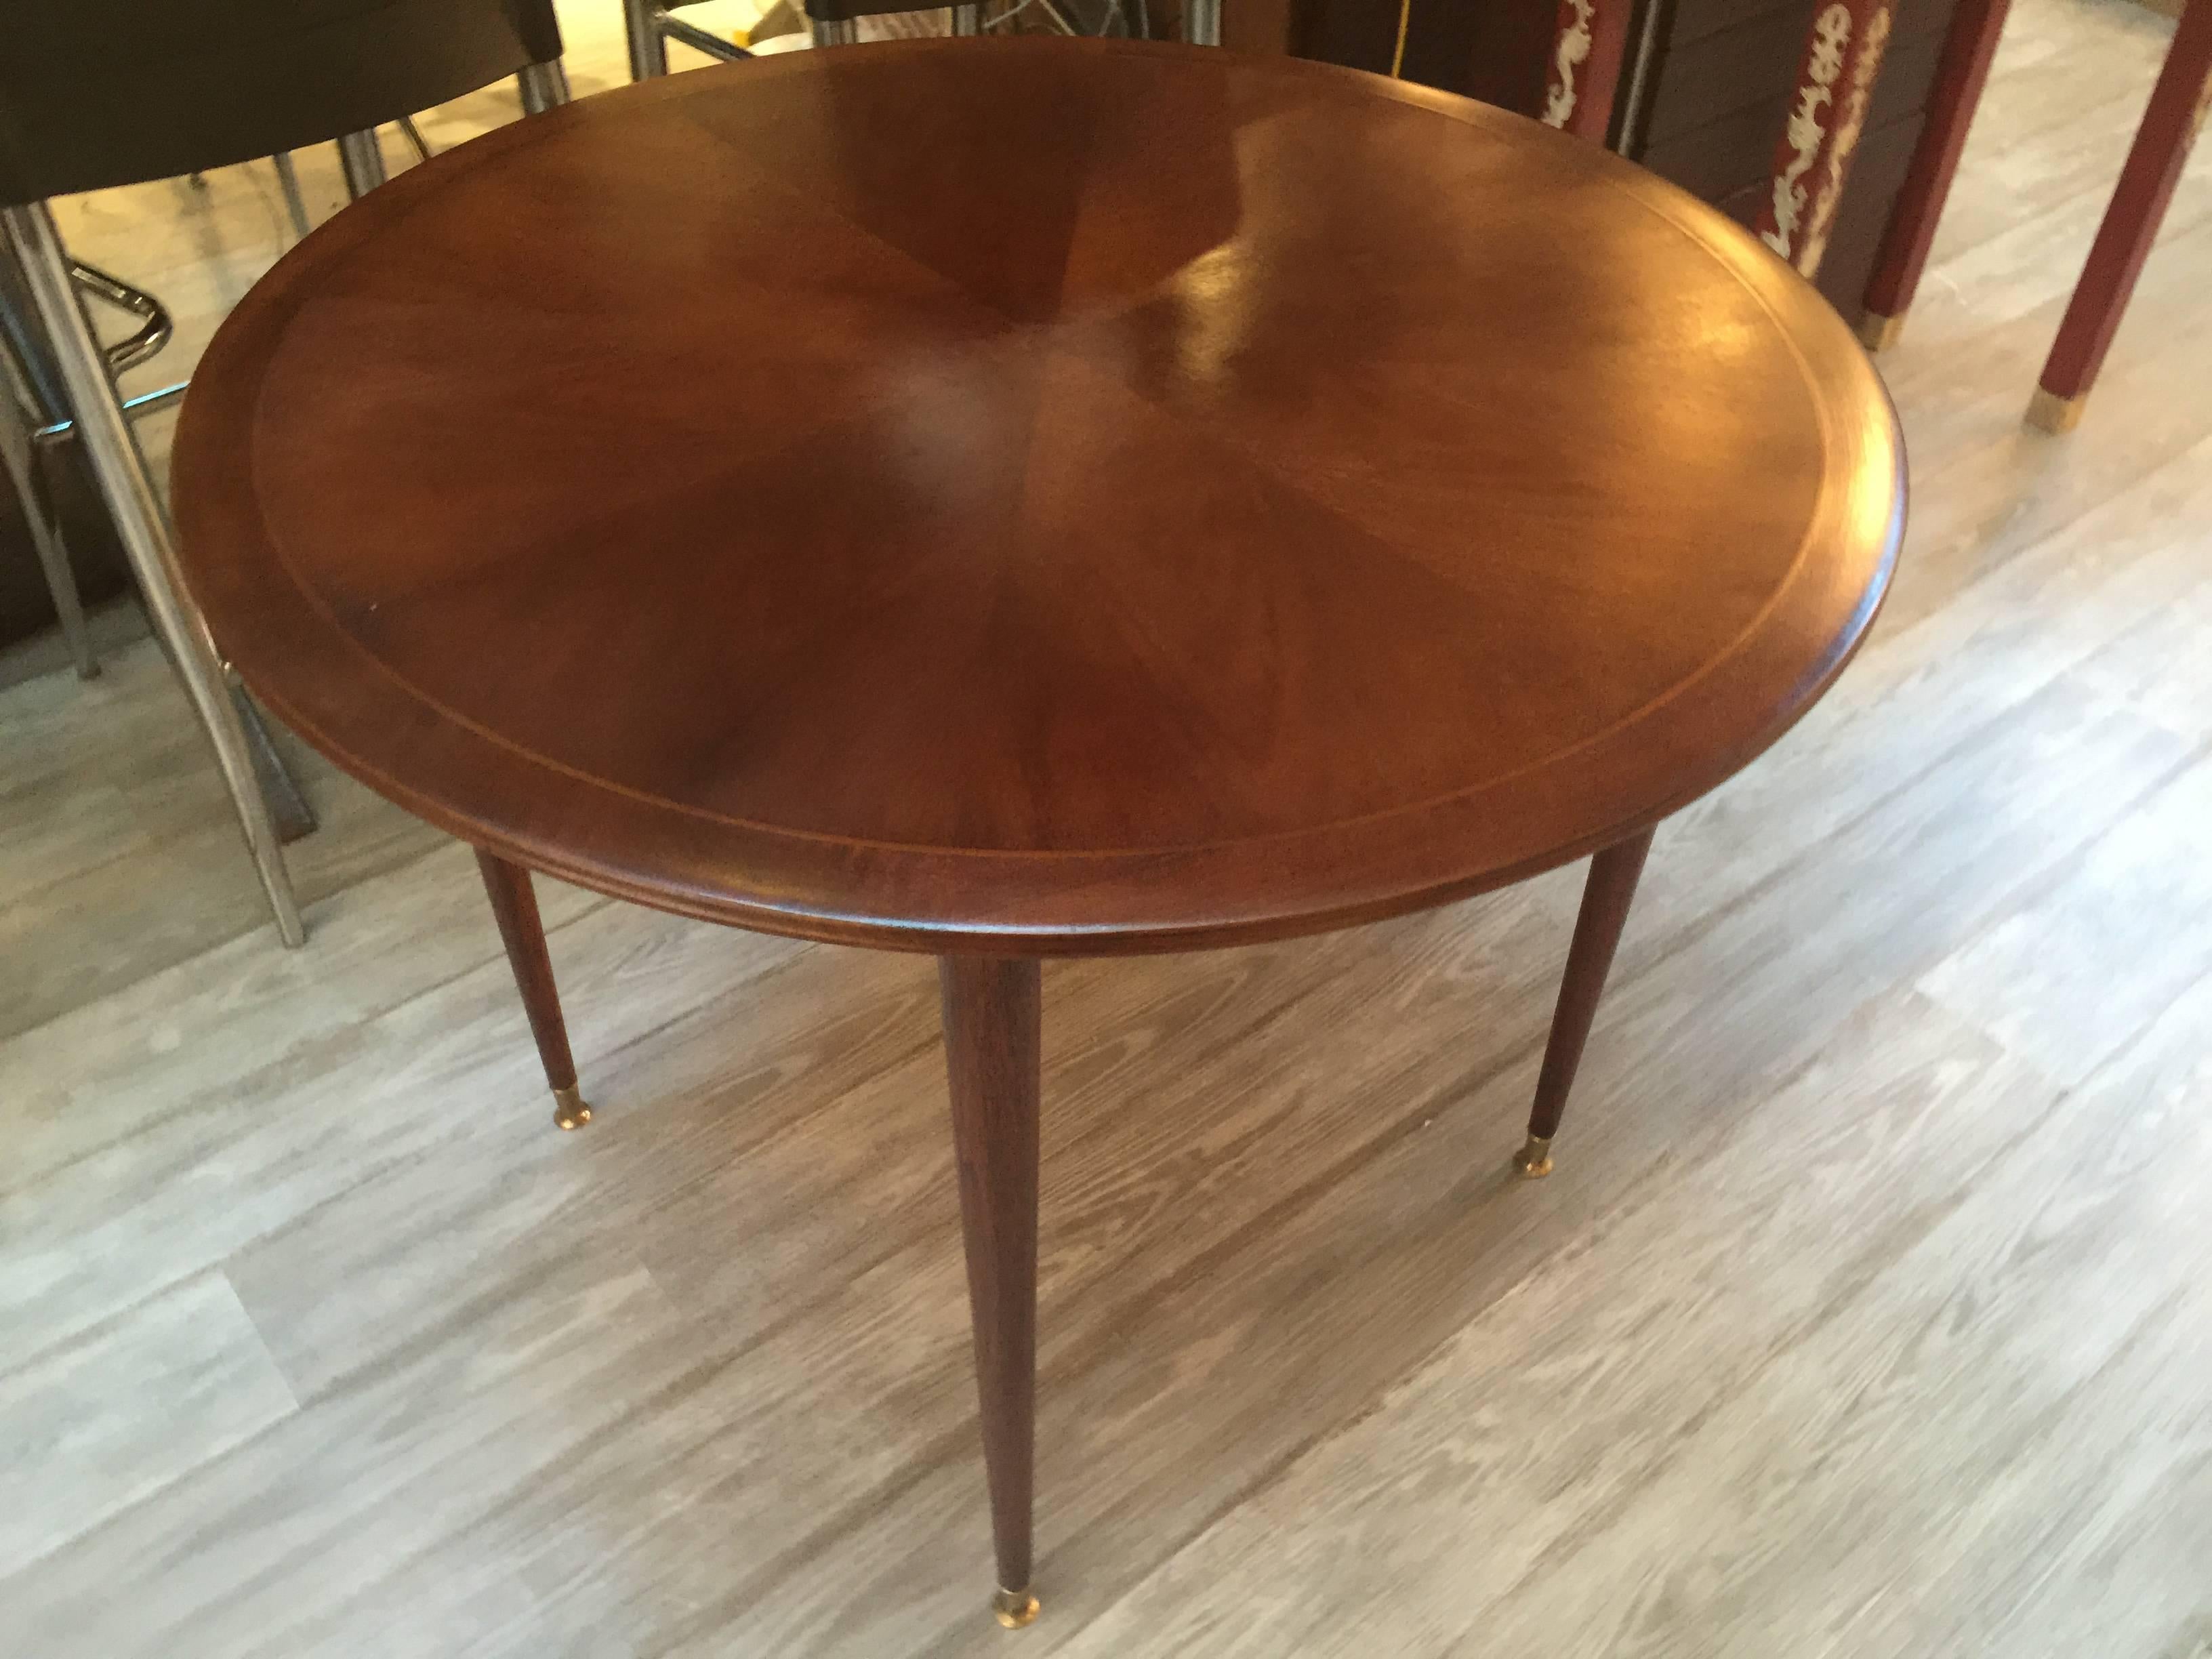 An elegant Gio Ponti style center table by Singer & Sons, round form with beautiful inlaid wood top with brass banded border and brass feet caps.